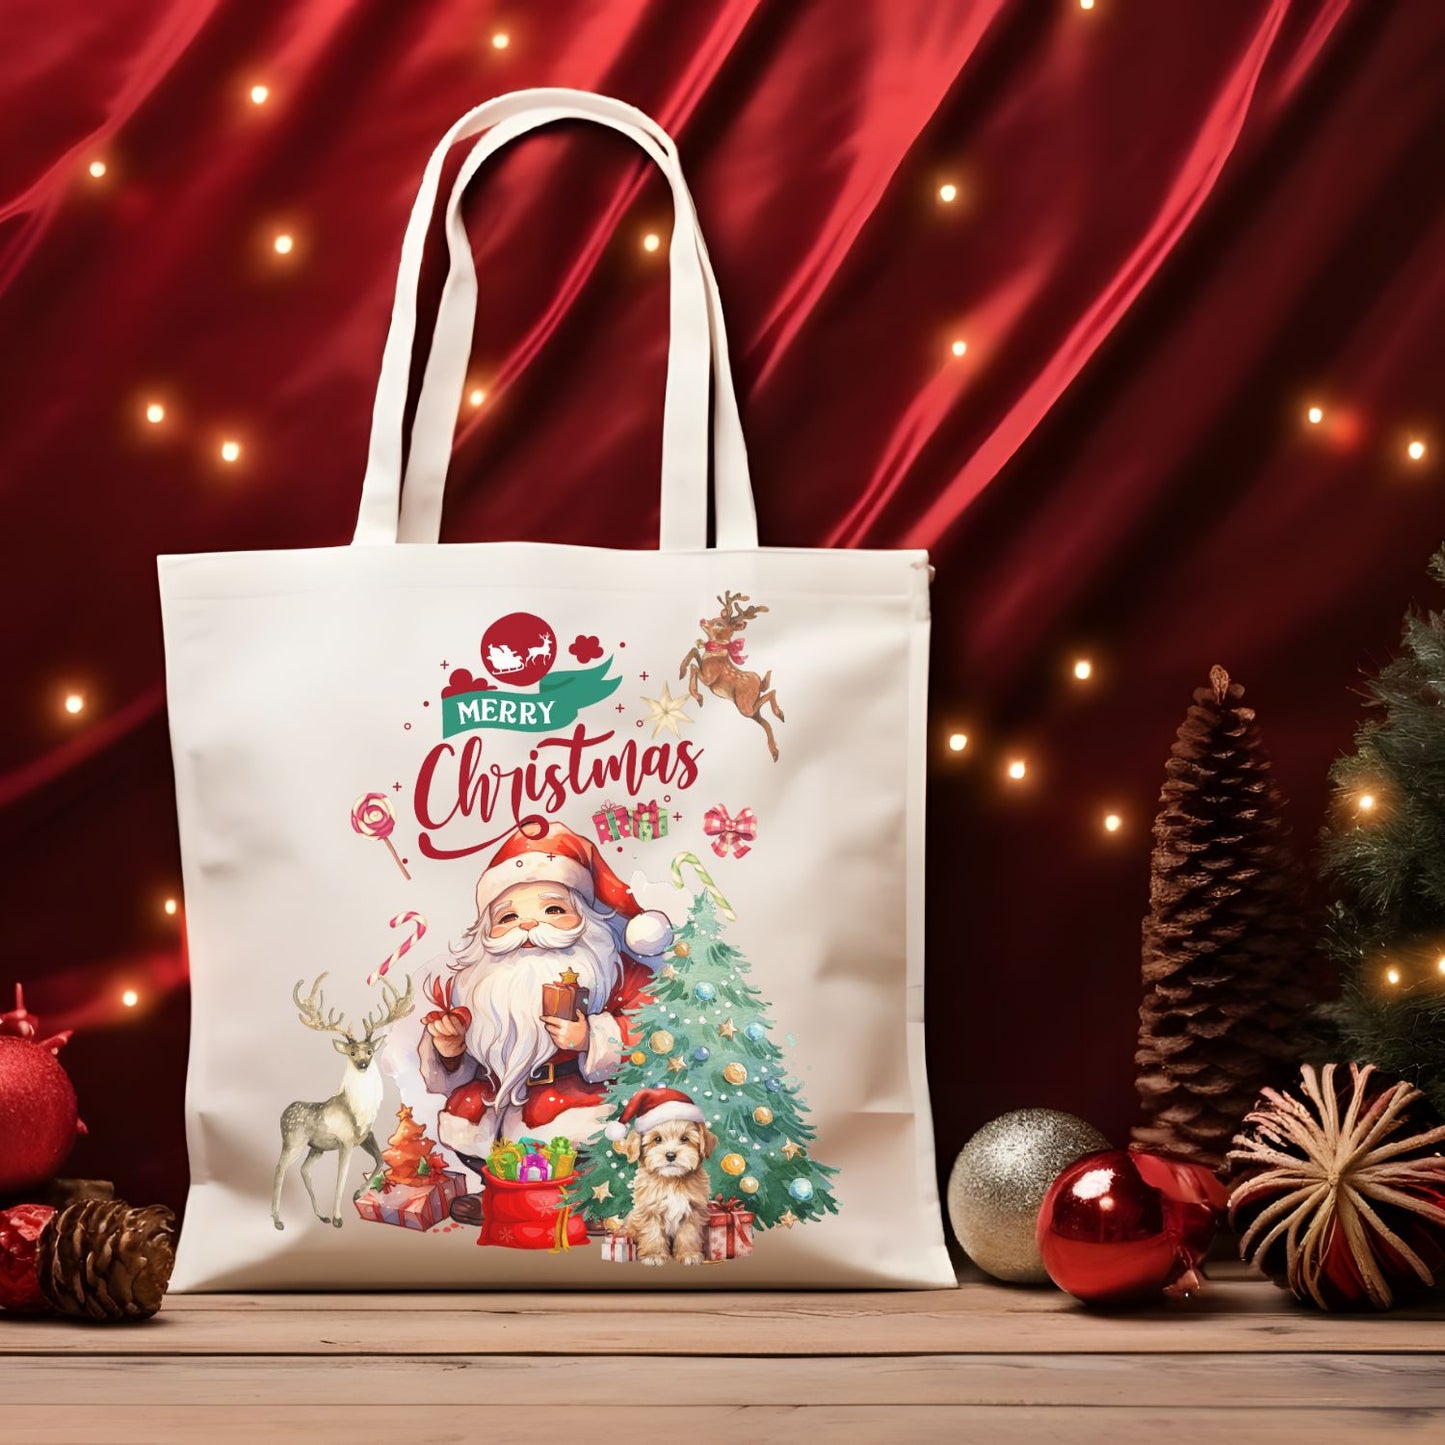 Merry Christmas Tote Bag - Family Christmas Gift Bag, Holiday Shopping with Santa Claus Accessories   